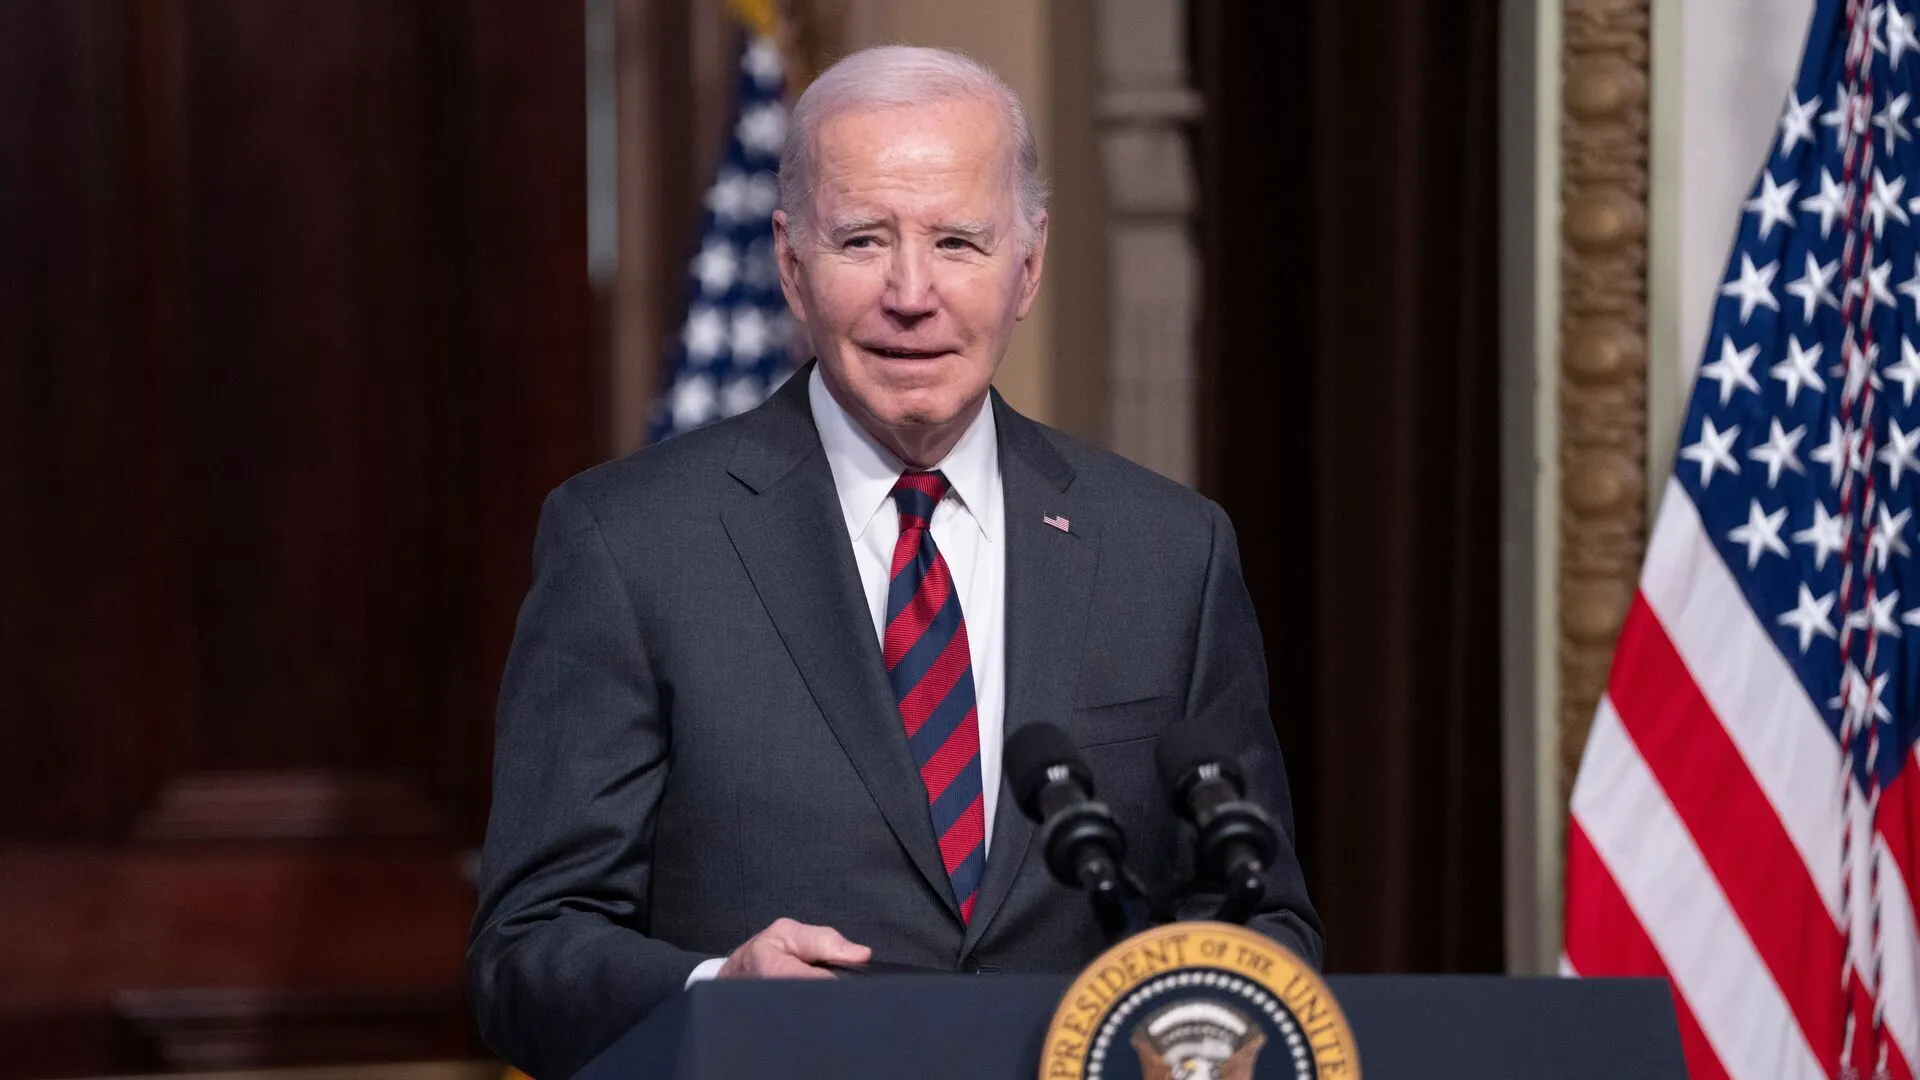 Mandatory Credit: Photo by Shutterstock (14233244u)United States President Joe Biden makes remarks on actions to strengthen supply chains in the Indian Treaty Room in Washington, DC,.